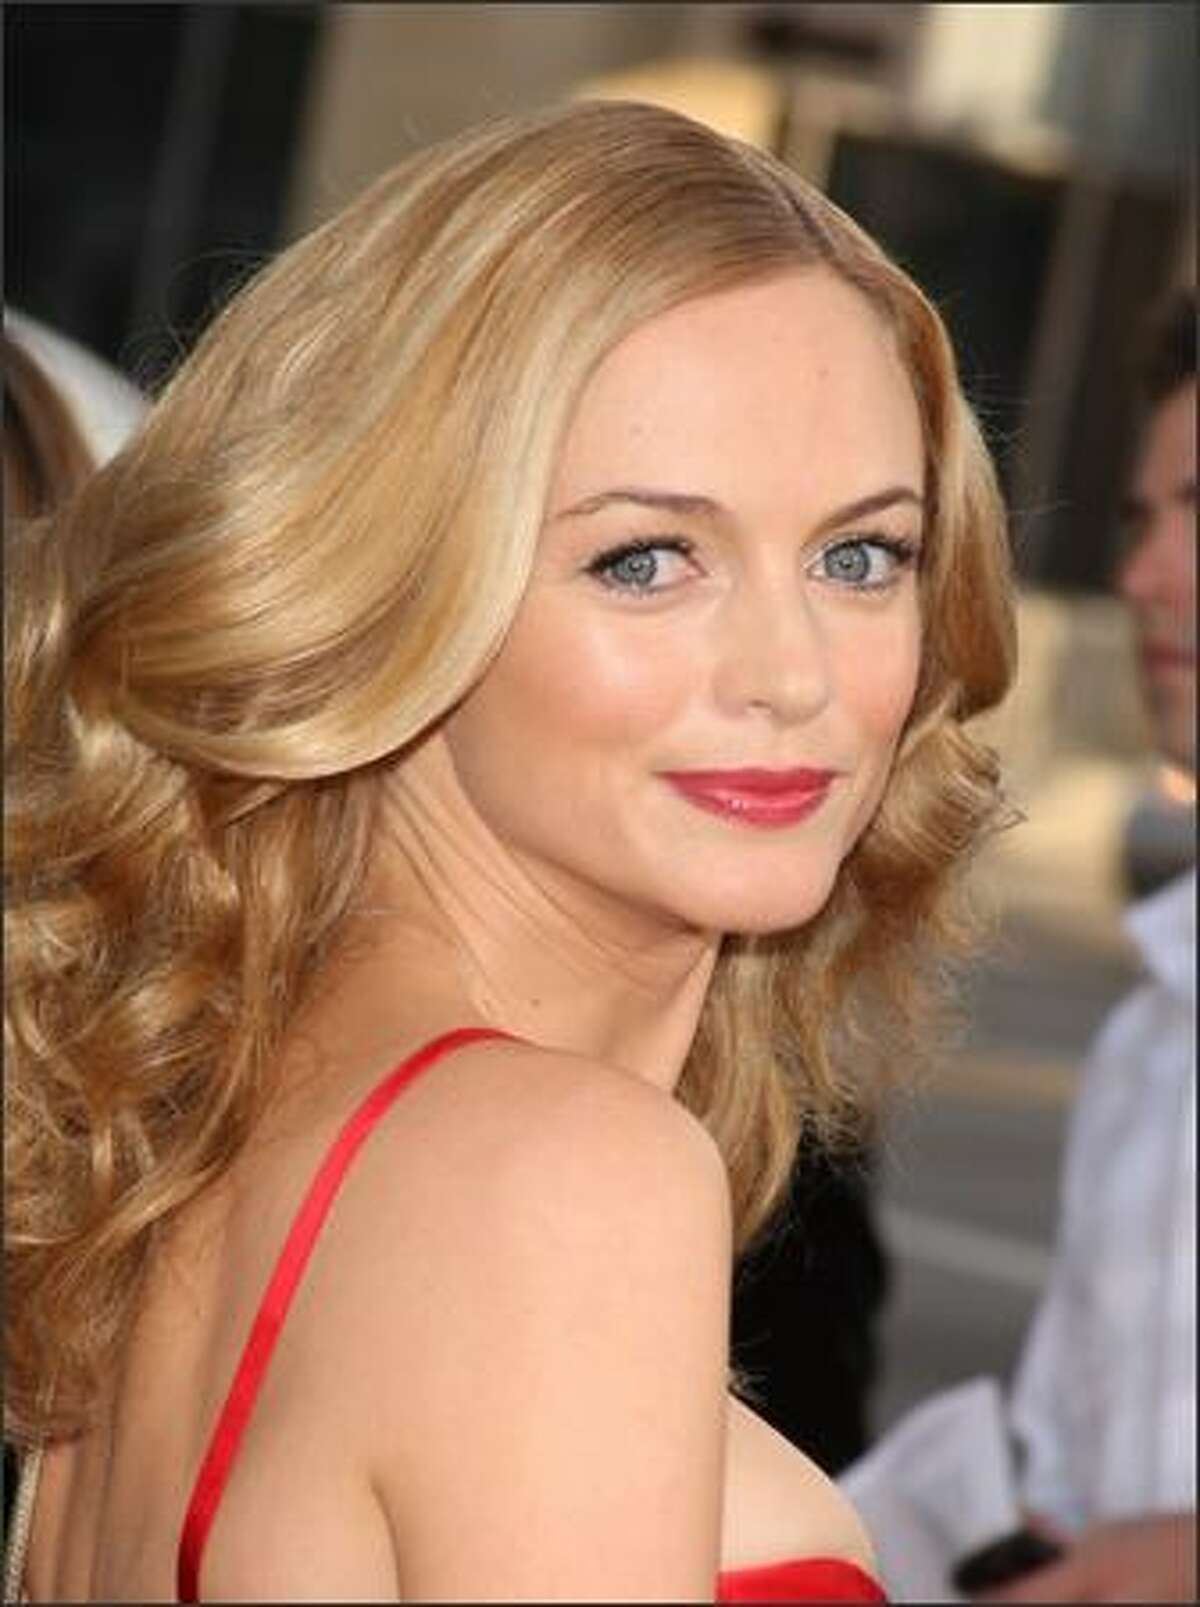 Actress Heather Graham arrives for the premiere of "The Hangover" at Grauman's Chinese Theatre in Hollywood, Calif., on June 2, 2009.